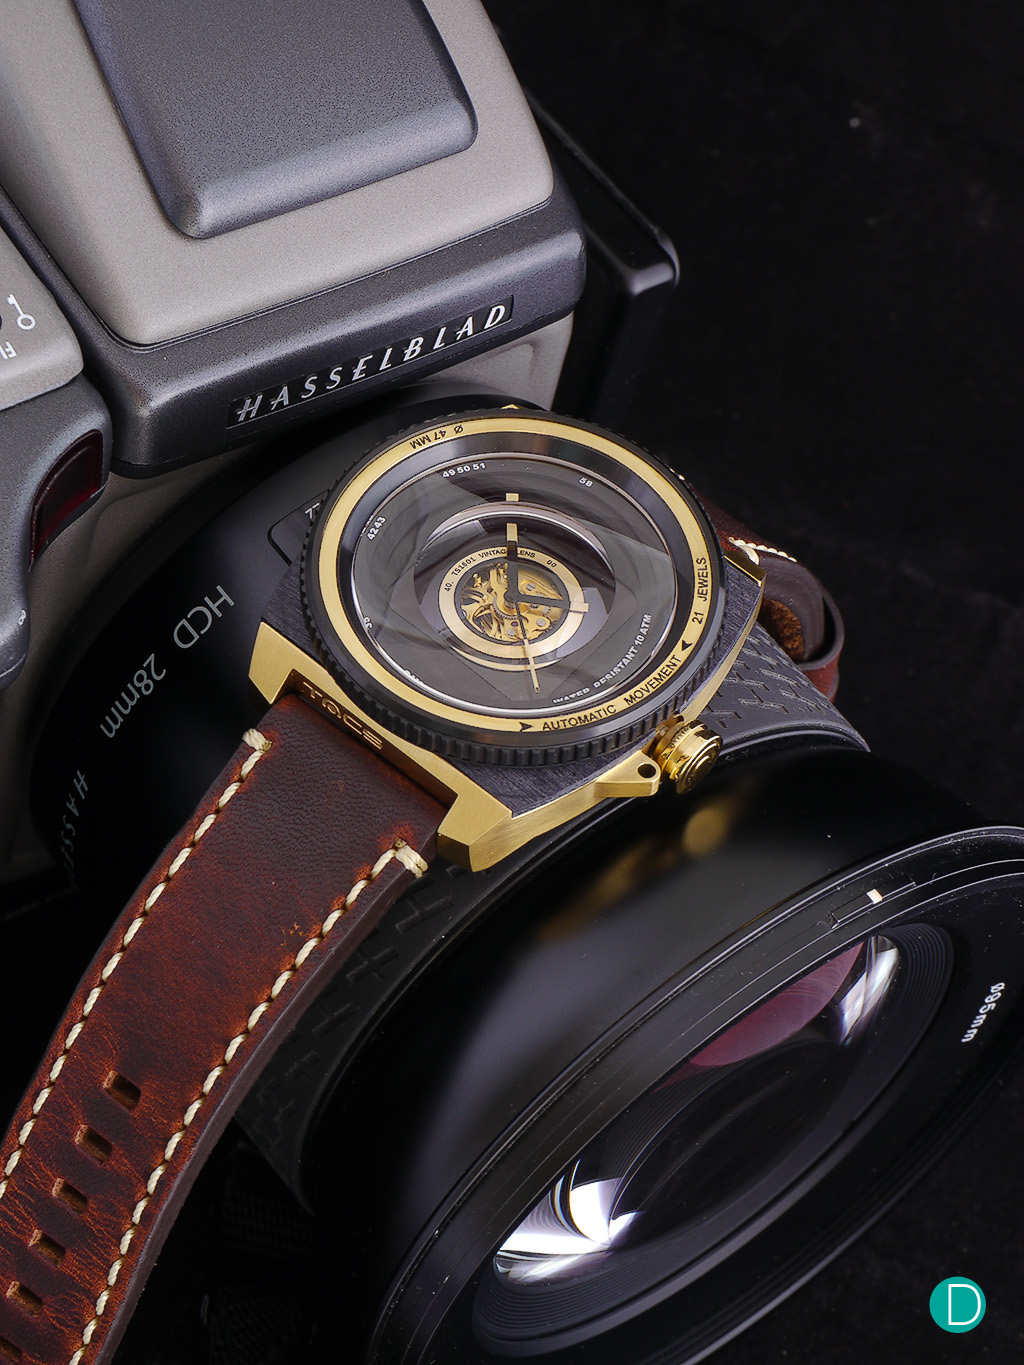 Perched on top of the author's Hasselblad H3D-39 digital camera with the HCD 4/28 lens, the TACS Vintage Lens Watch does have evoke some feel of old world photography.